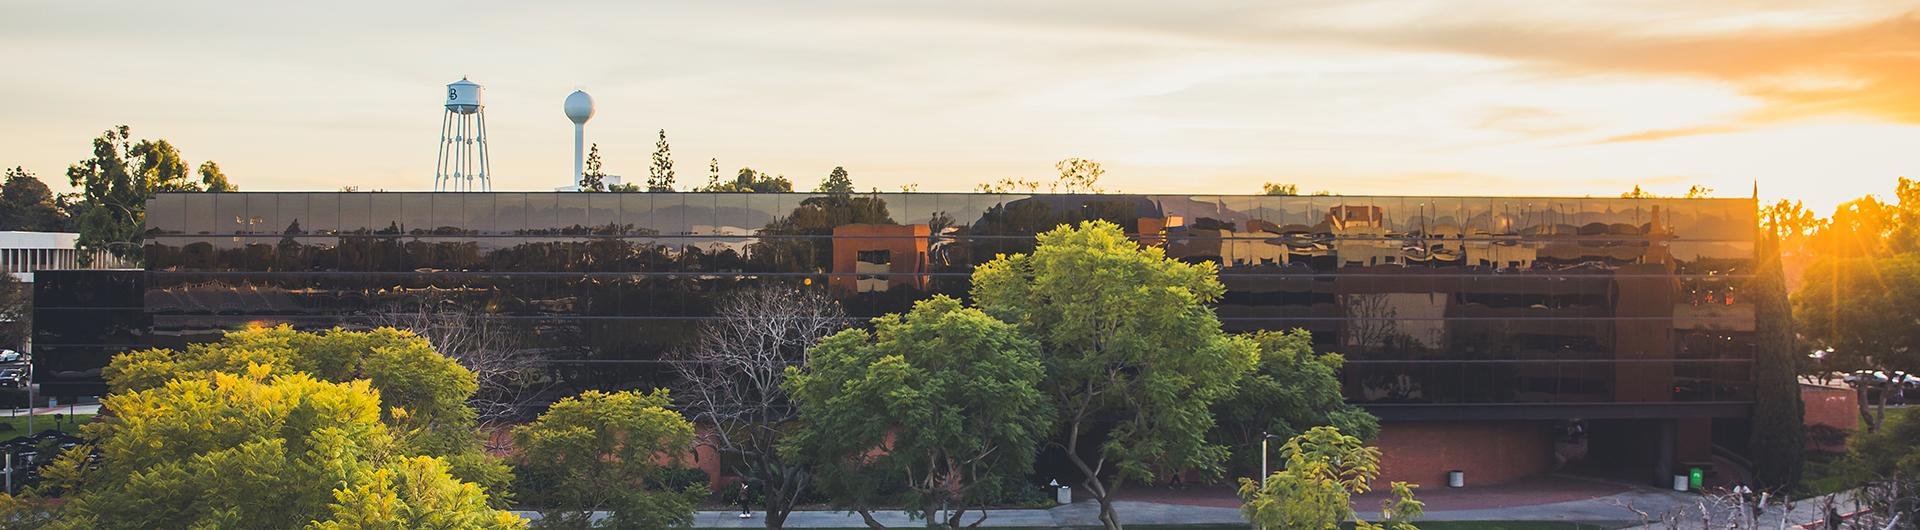 College of Business Building at Sunset